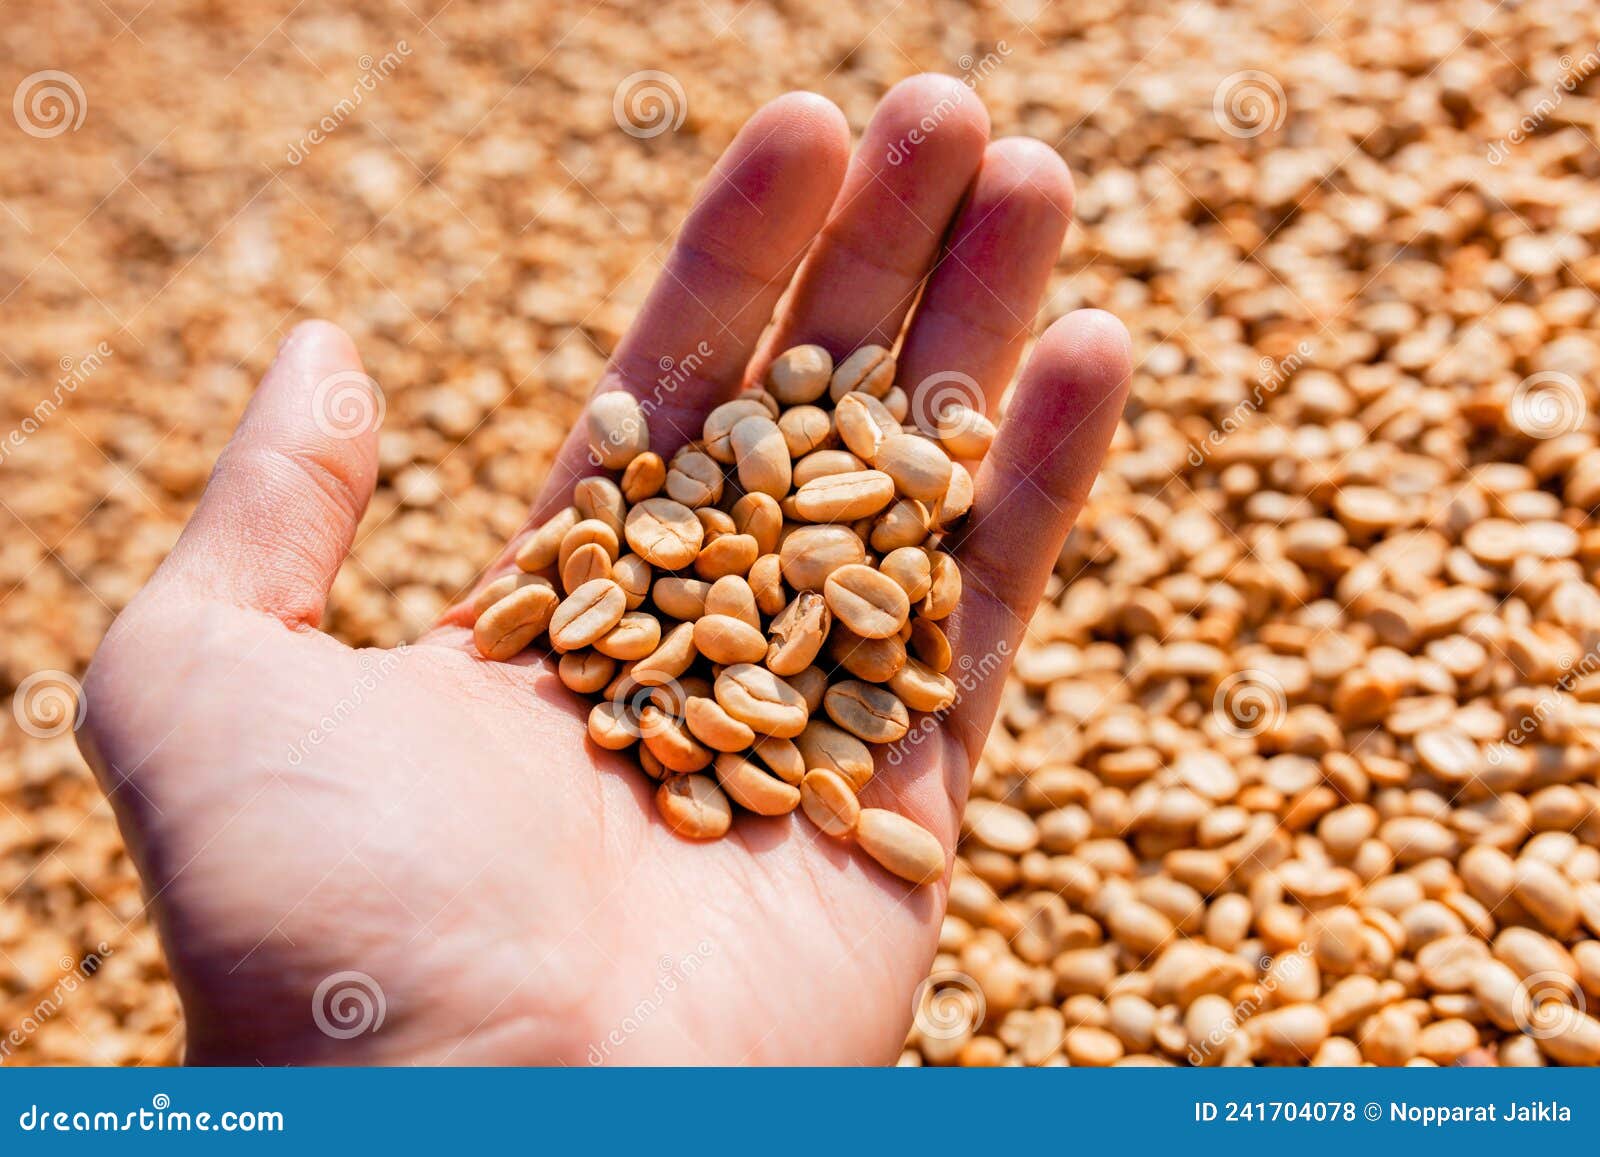 female hands holding raw coffee beans